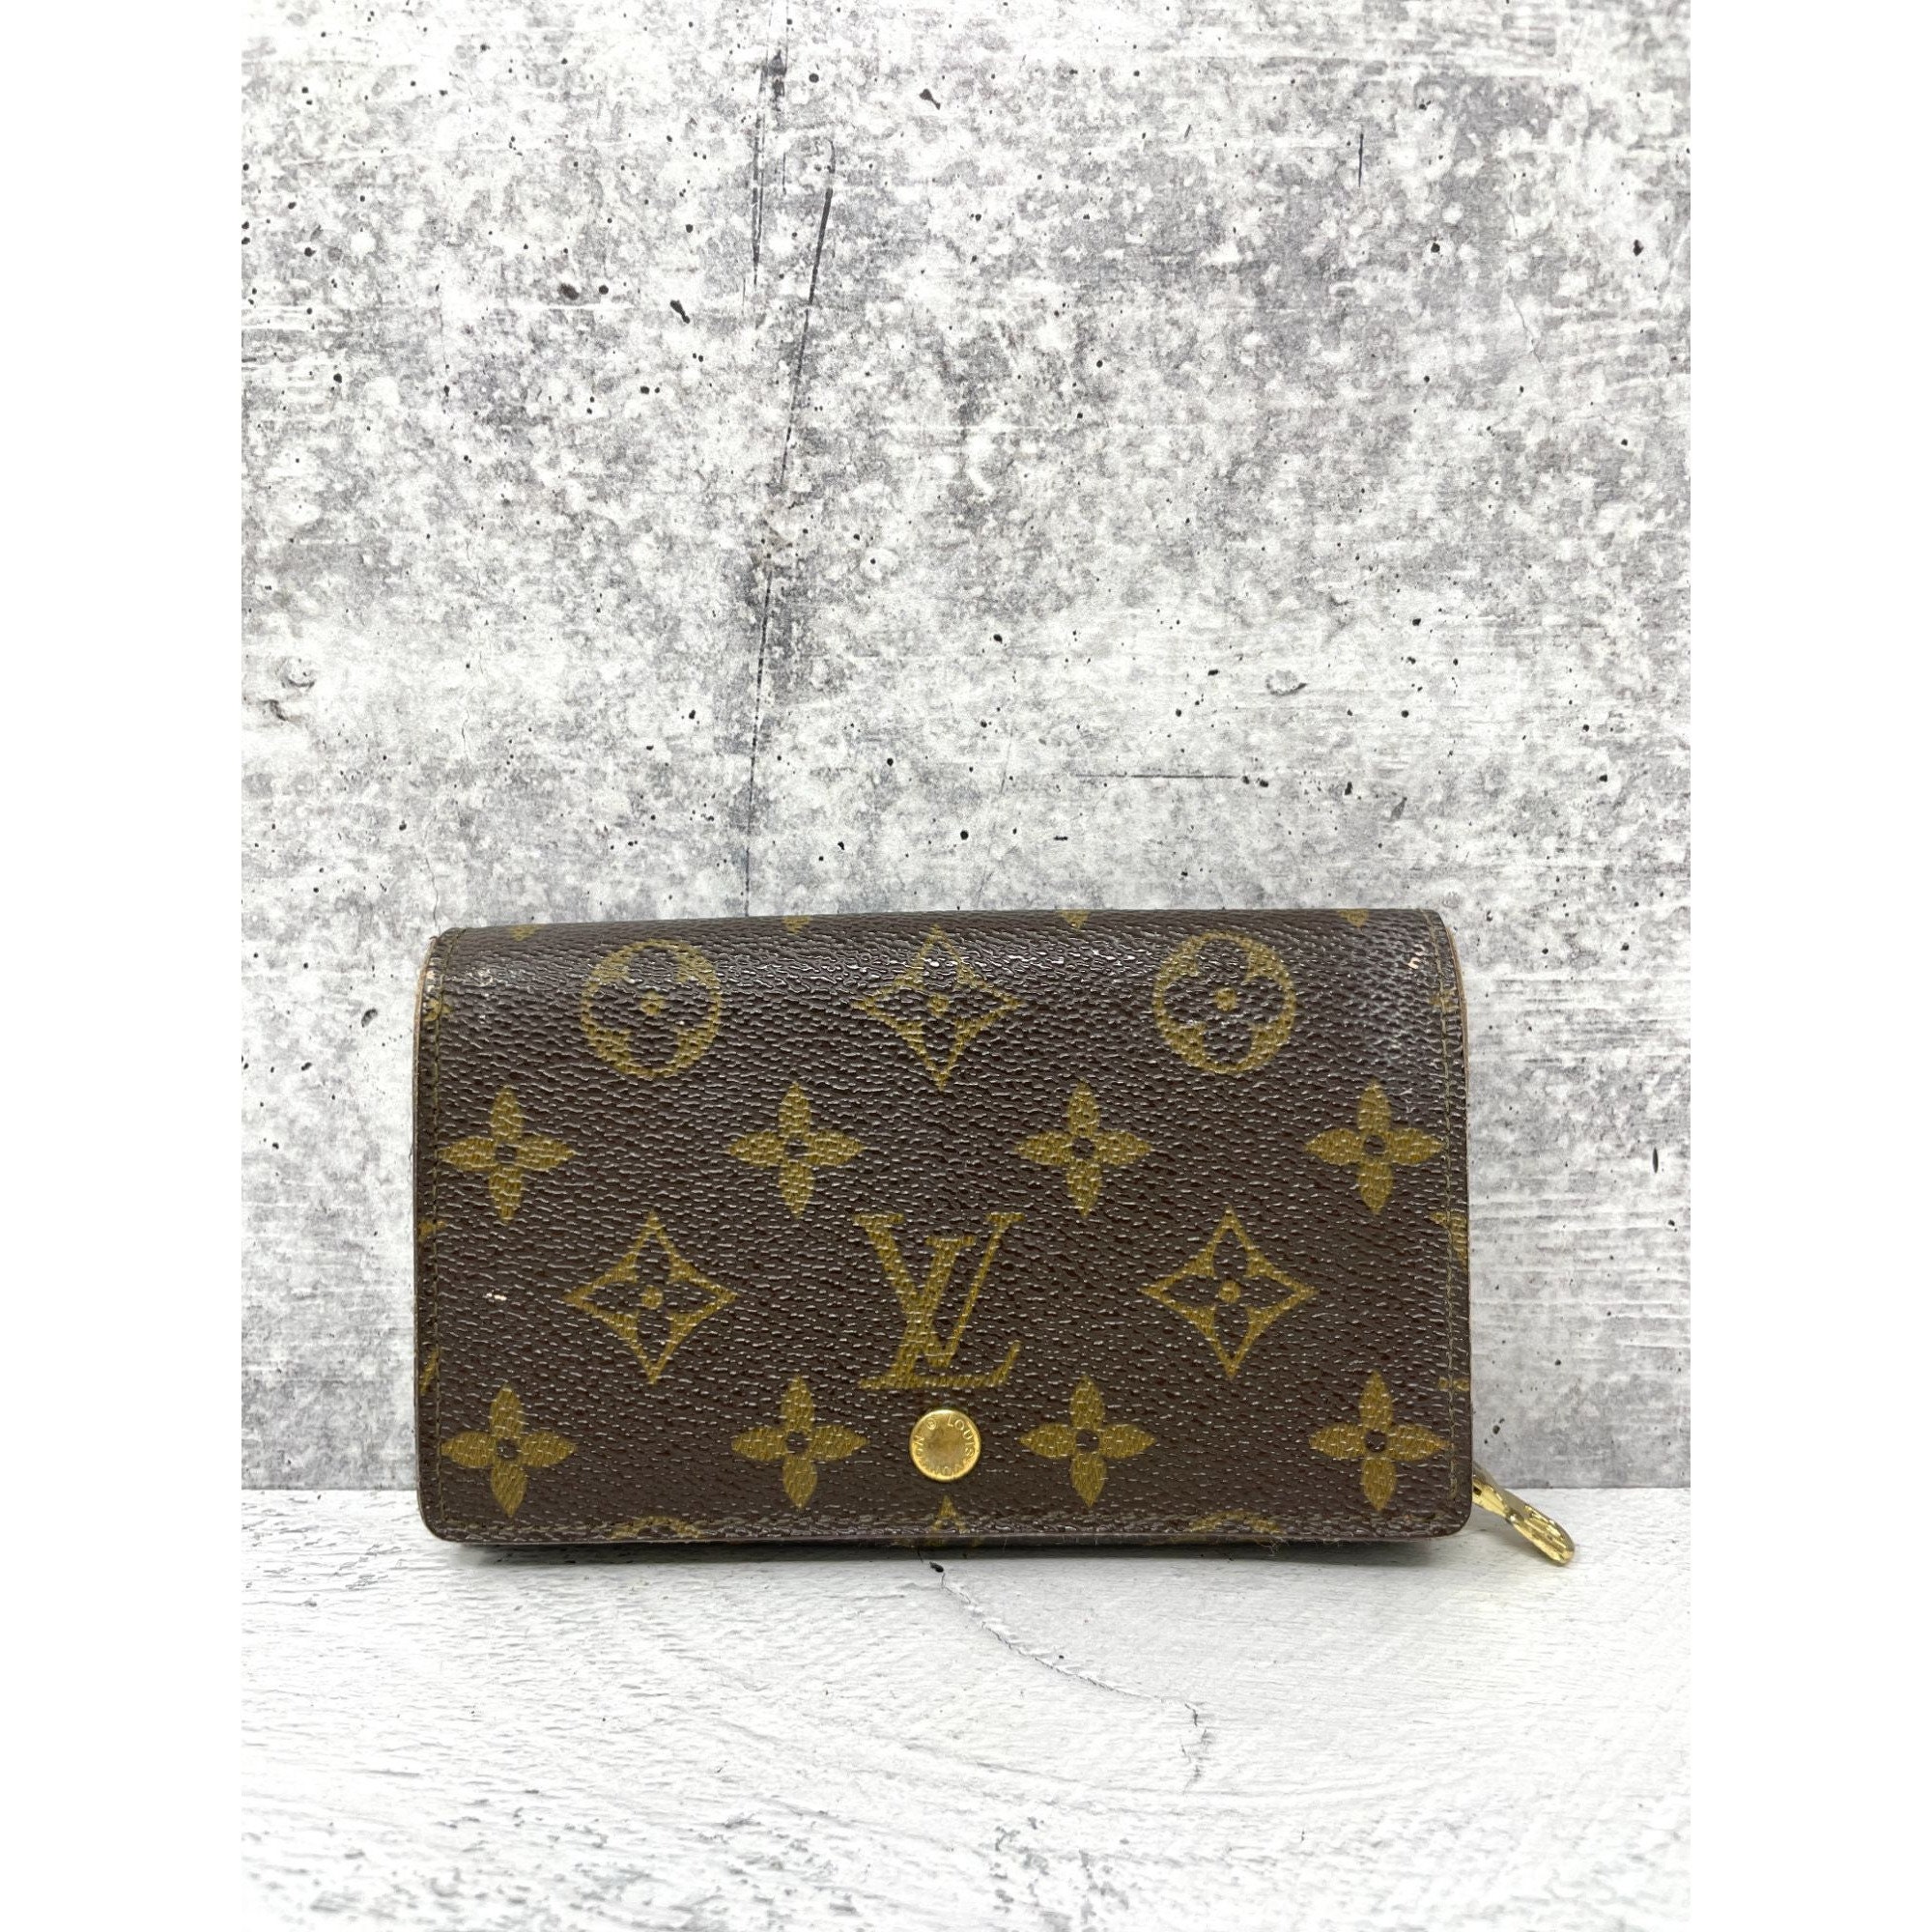 Buy Coin Purse Louis Vuitton Online In India -  India